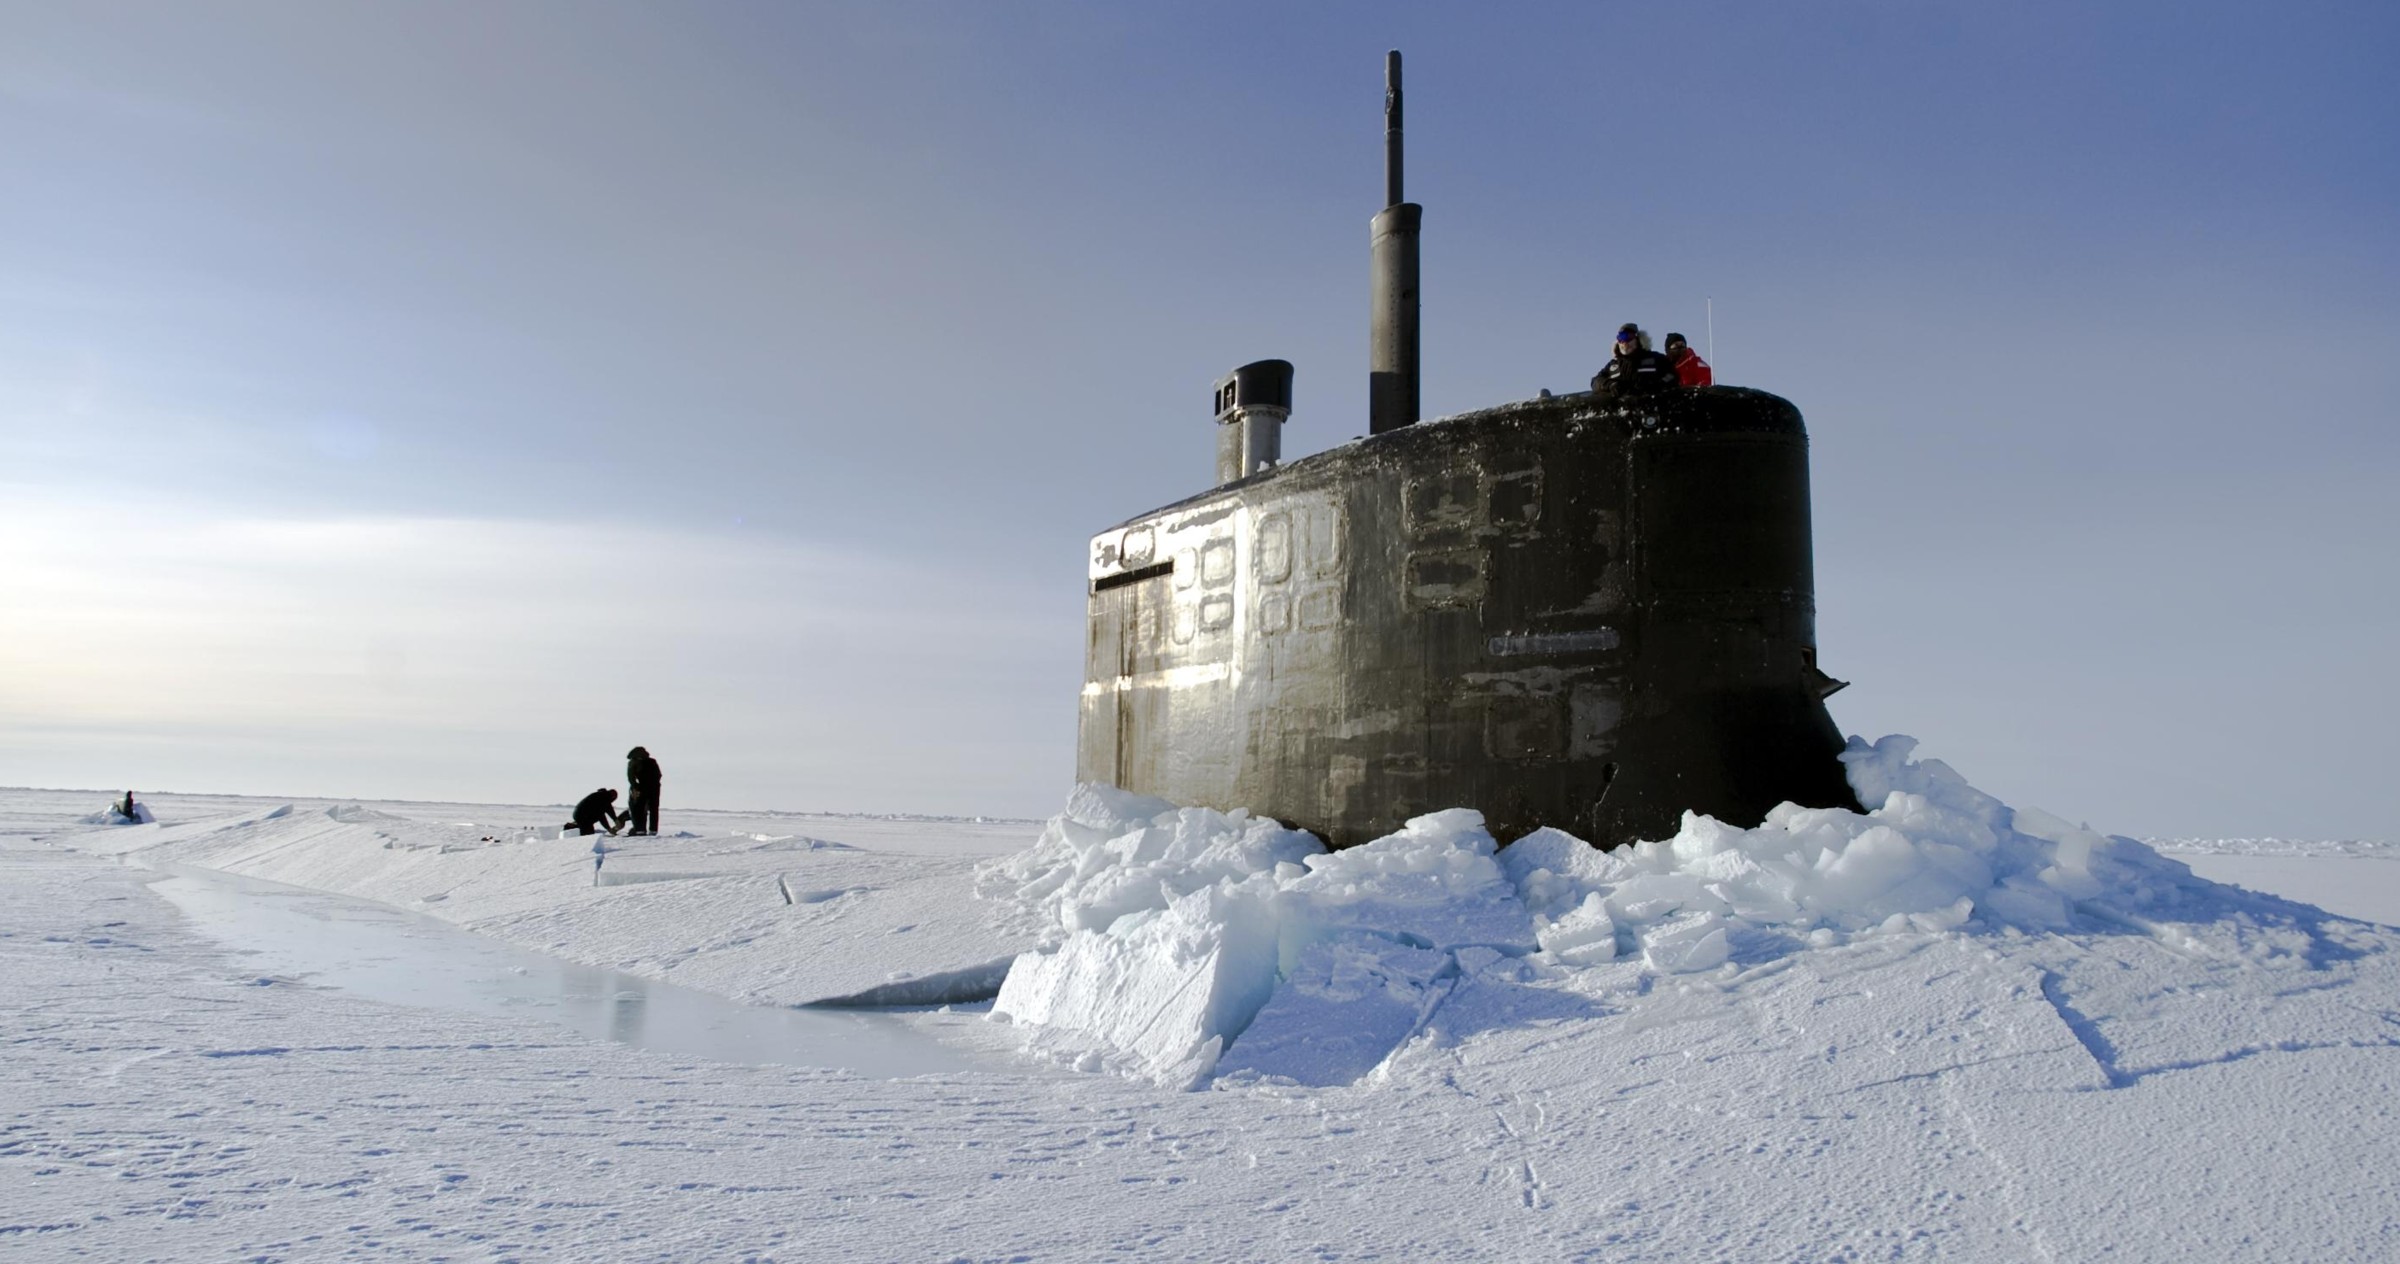 ssn-22 uss connecticut seawolf class attack submarine us navy exercise icex 11 arctic ocean 14 prudhoe bay alaska